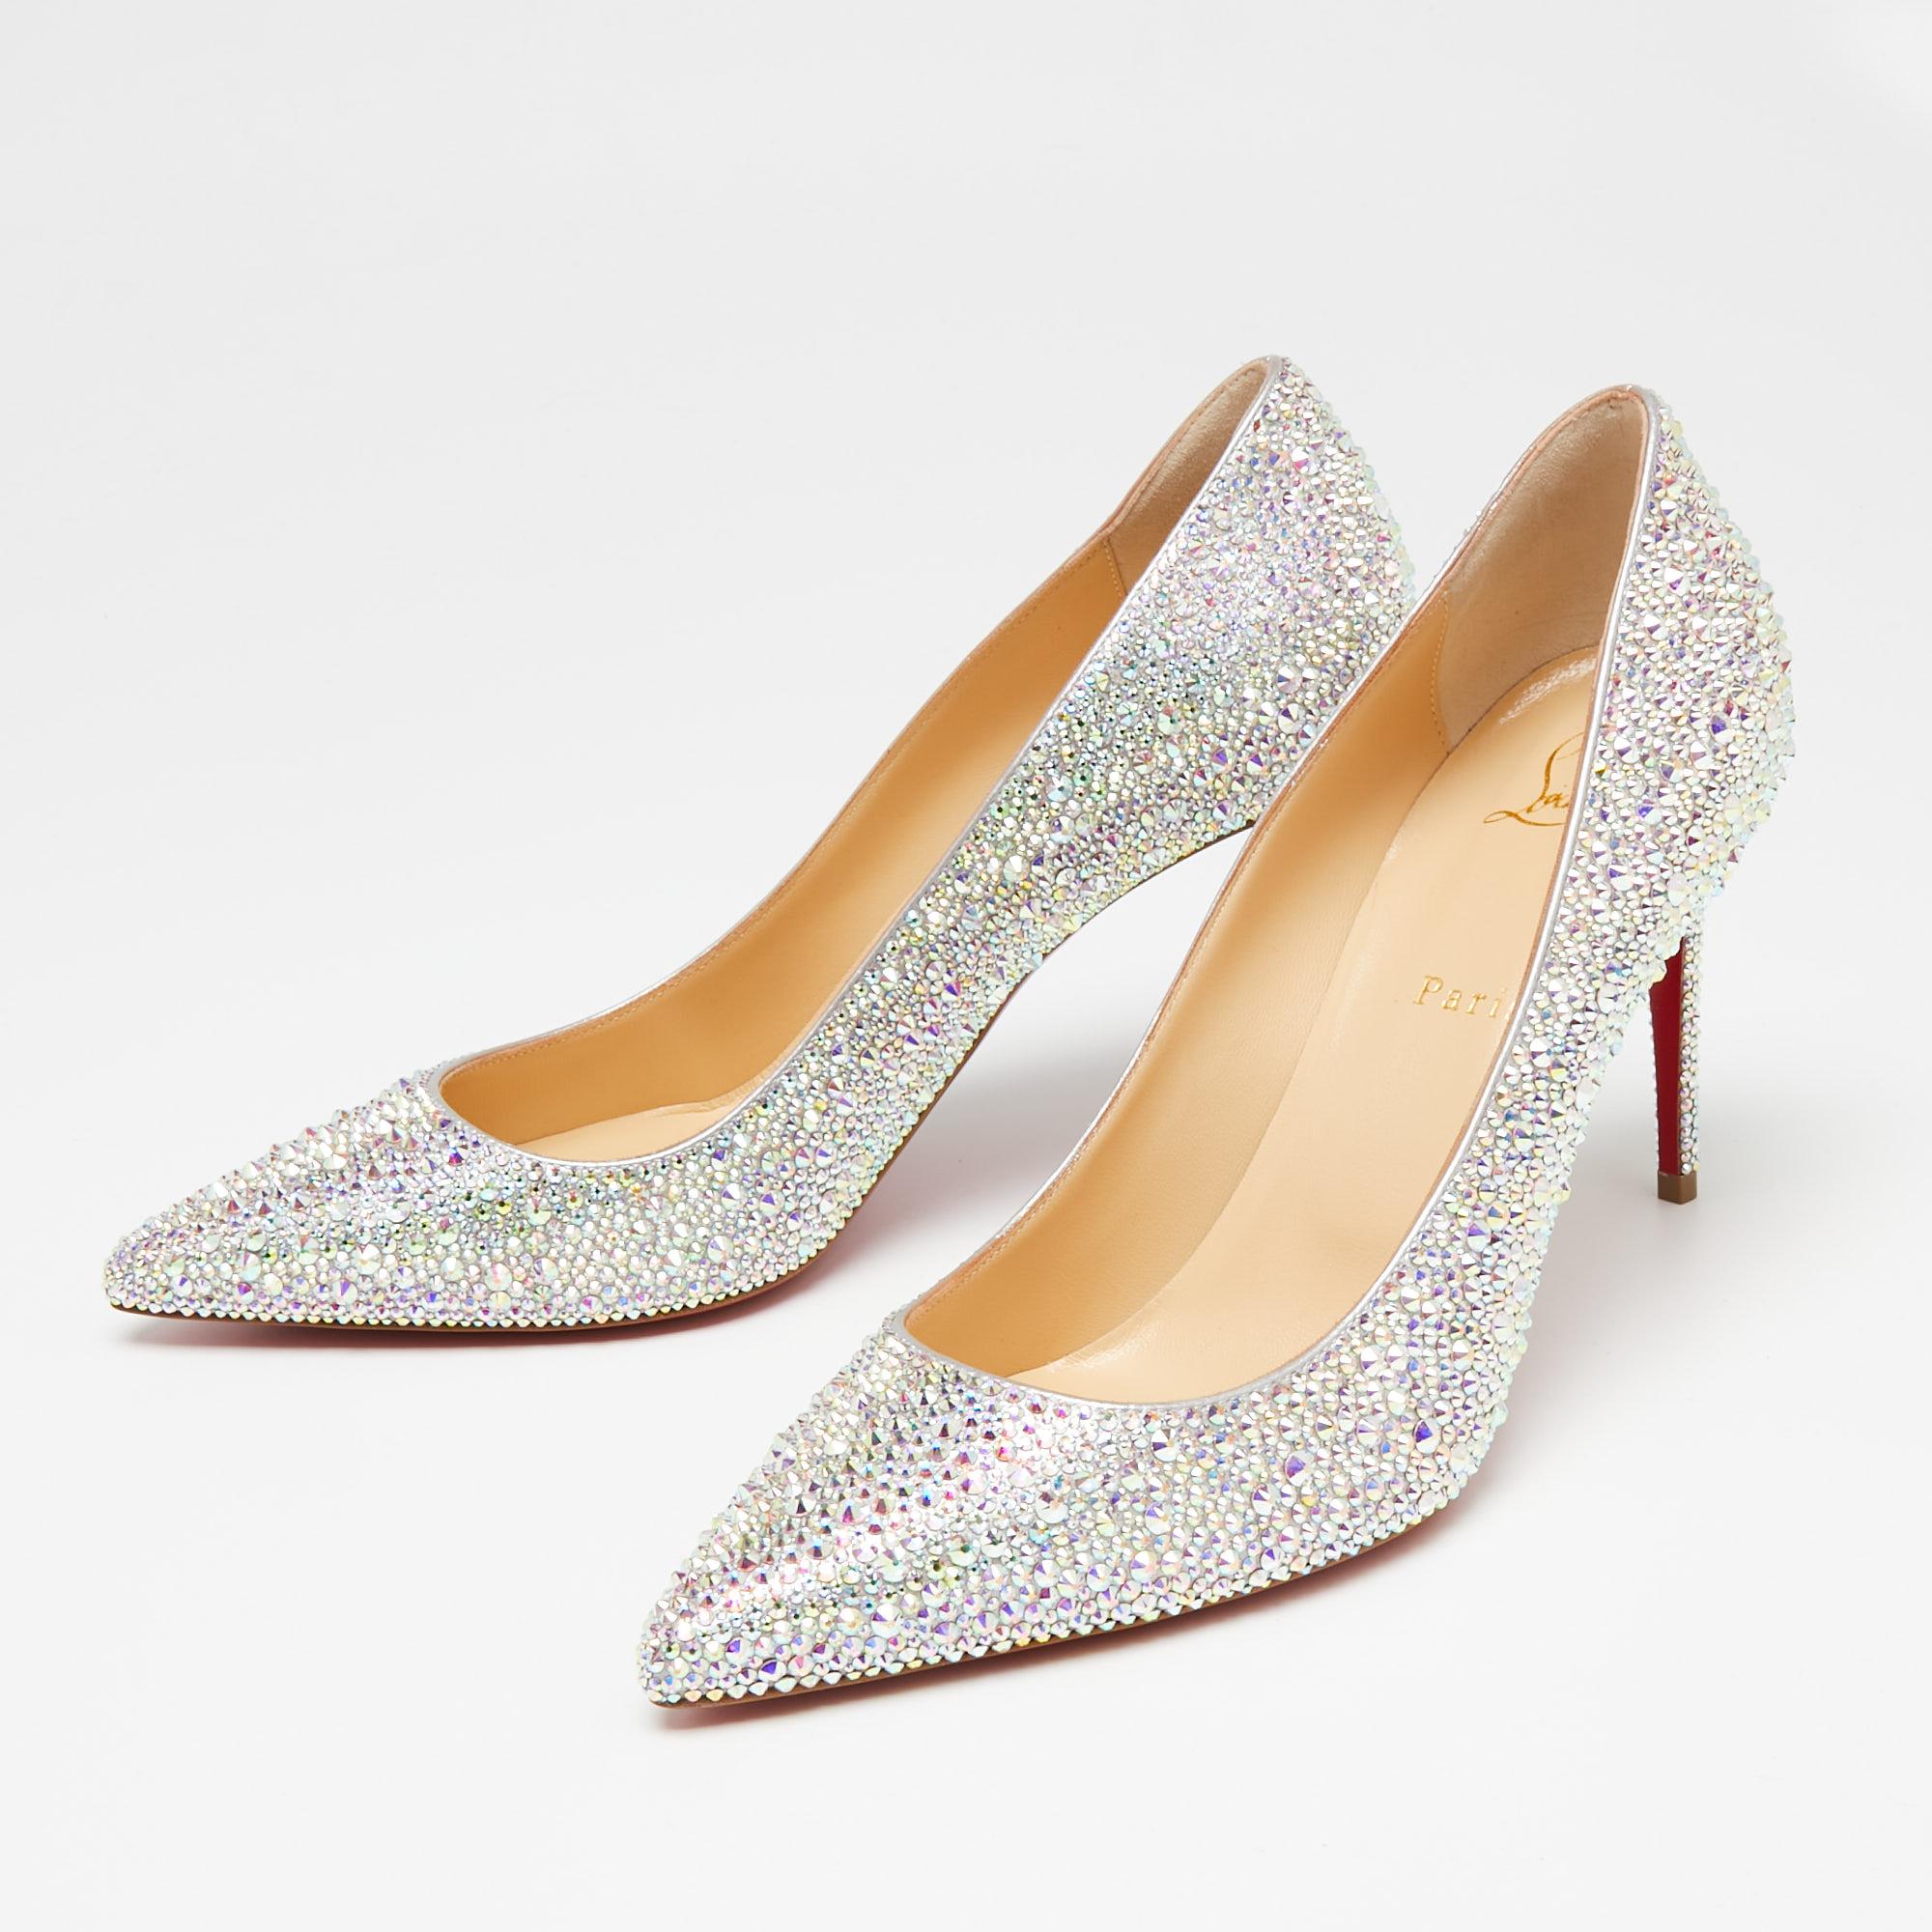 Beige Christian Louboutin Multicolor Leather Strass Degrade Kate Pumps Size 39